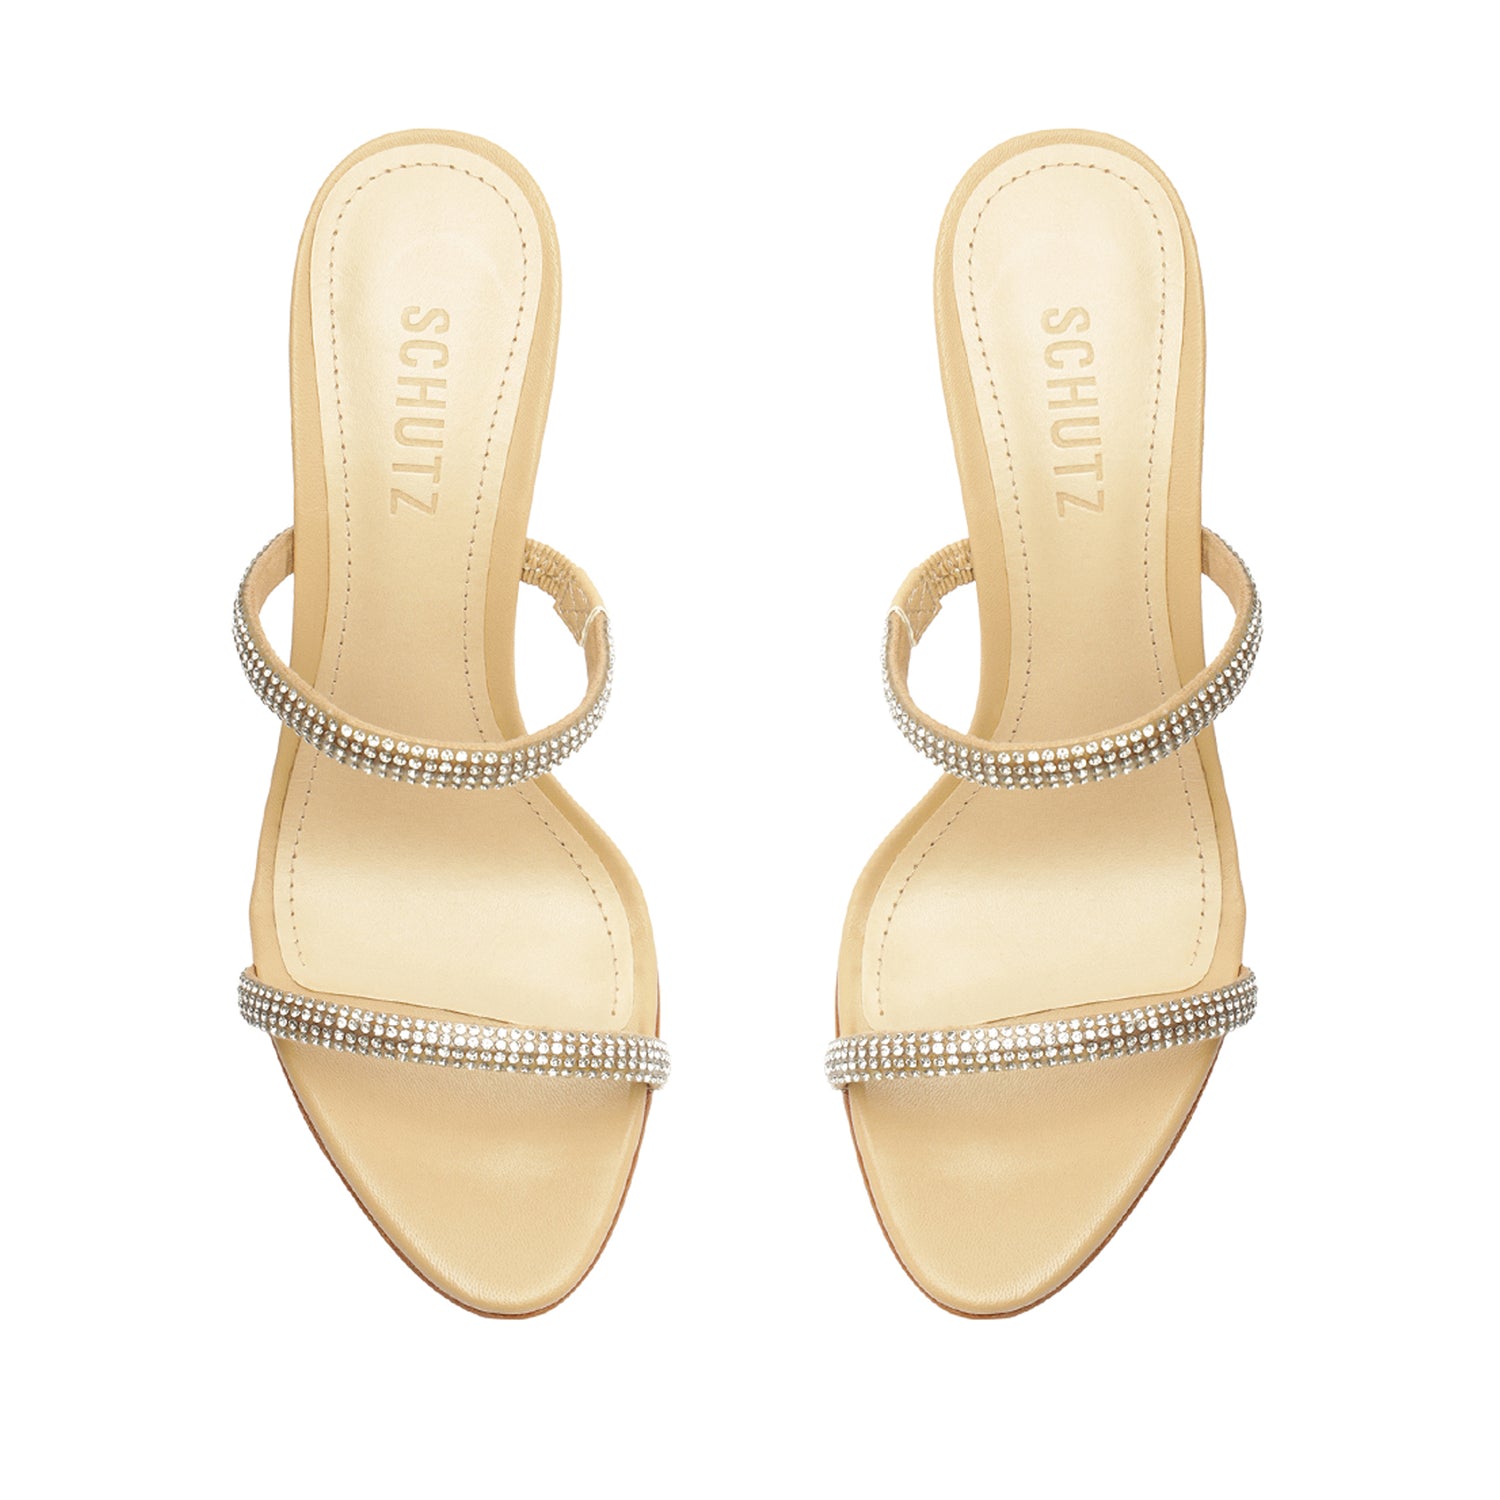 Taliah Glam Lather & Crystal Sandal Sandals FALL 23    - Schutz Shoes